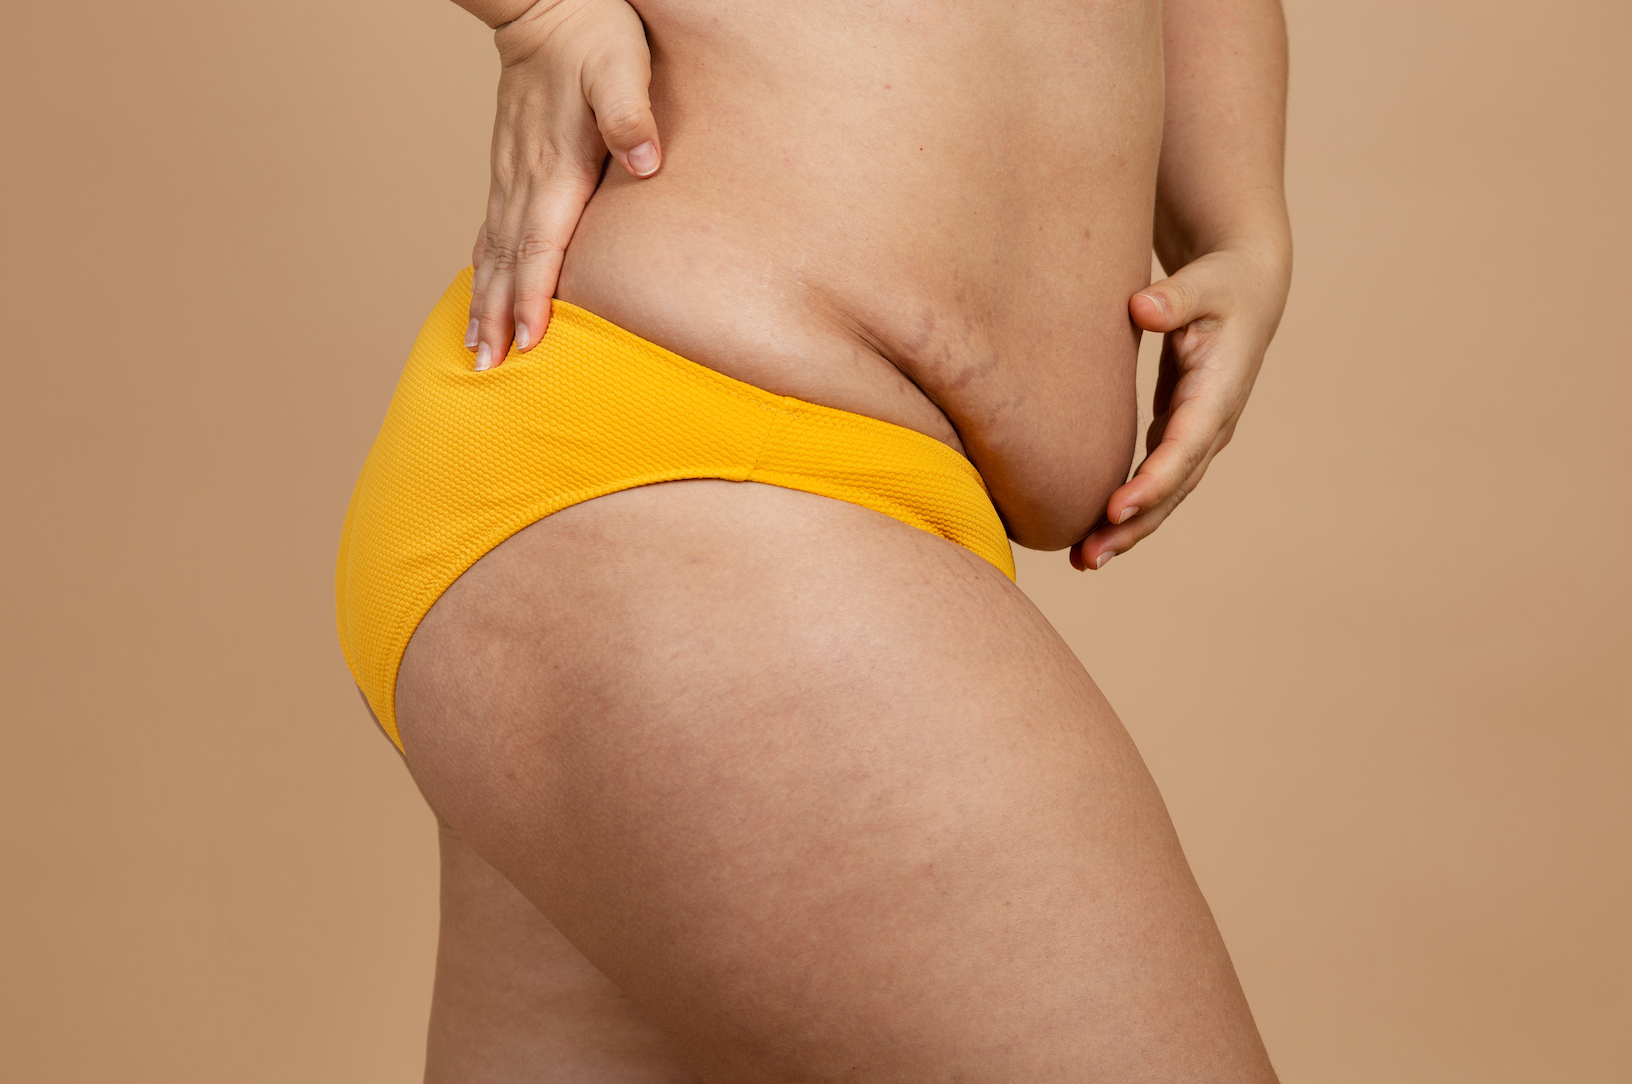 What Is A Tummy Tuck? | what happens during a tummy tuck, stages of a tummy tuck, tummy tuck scar recovery